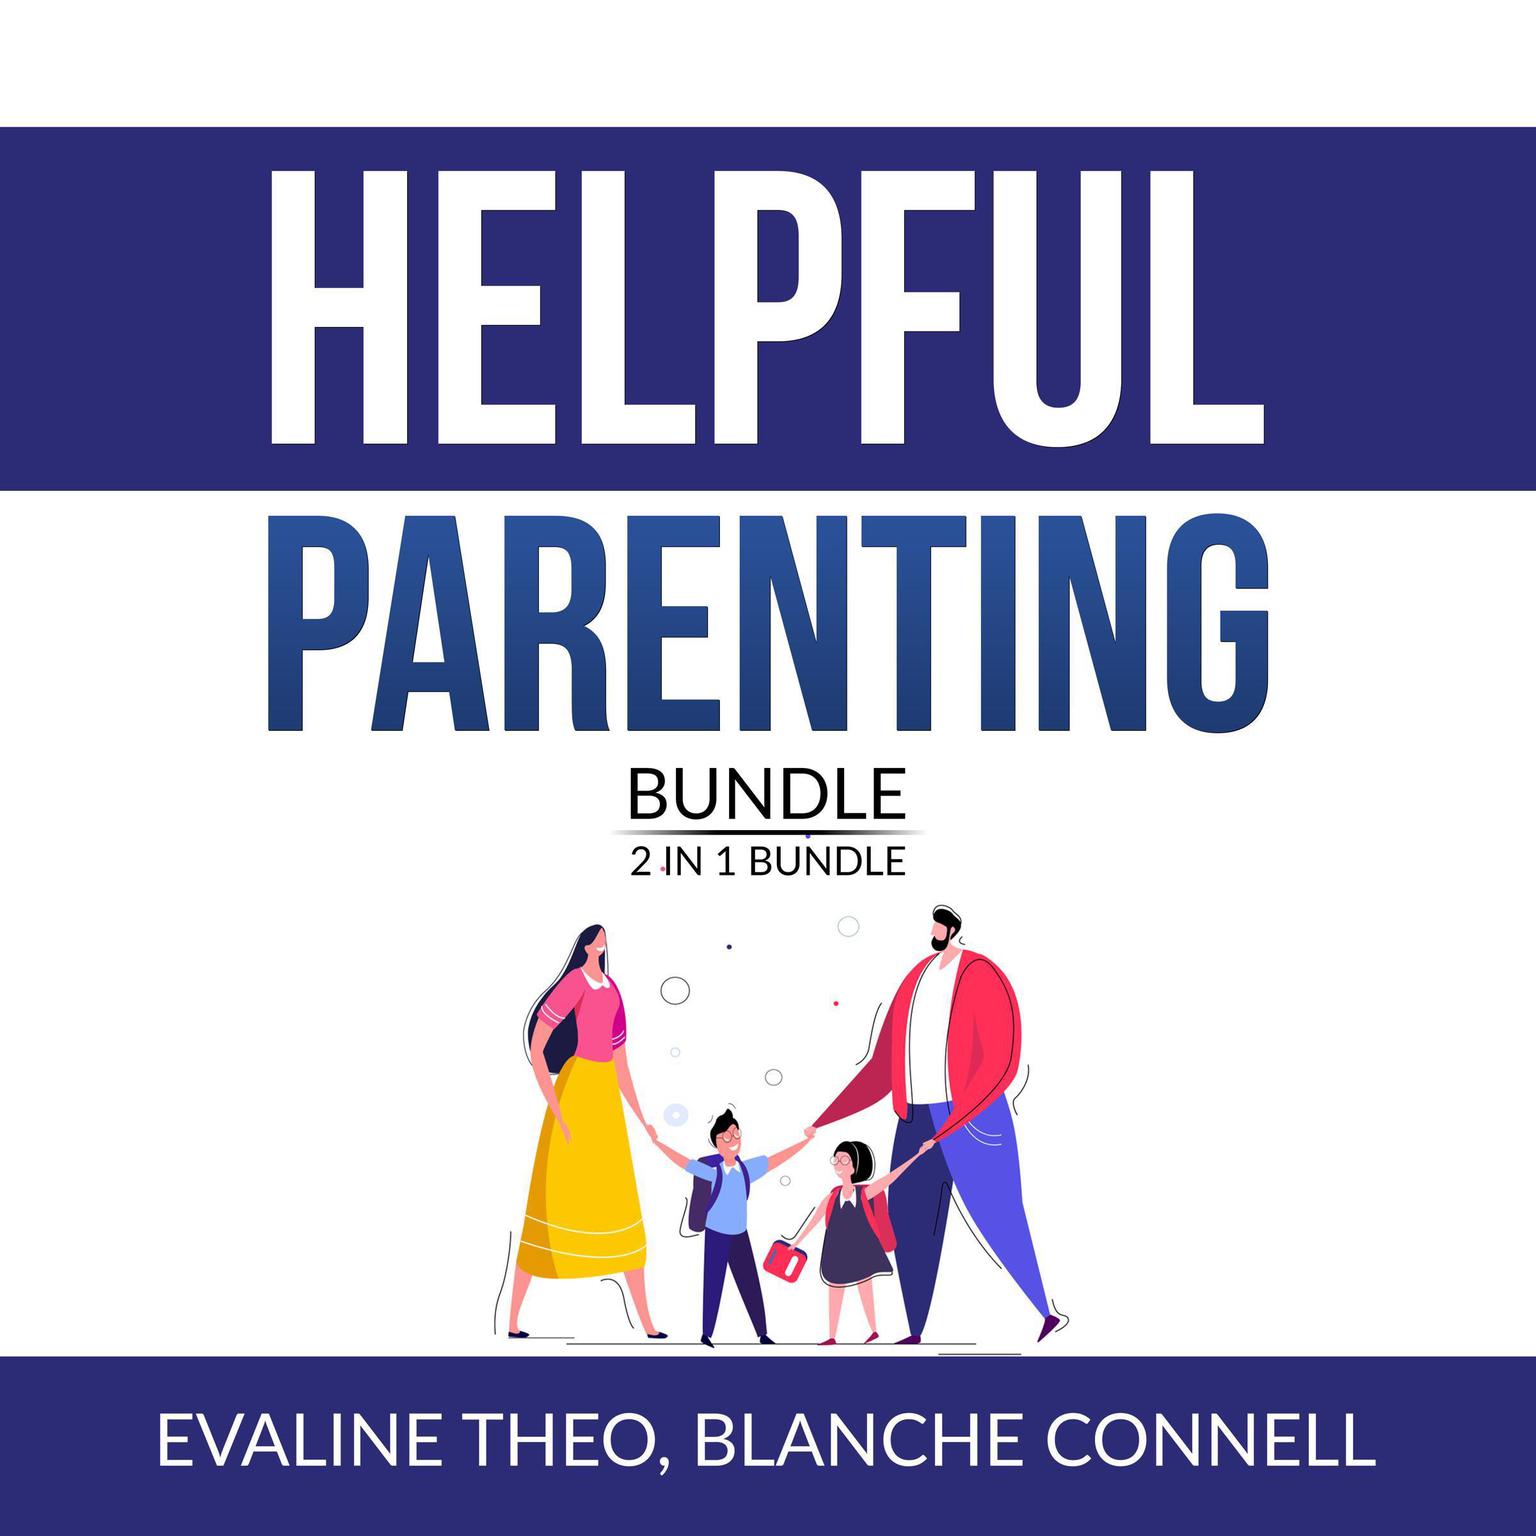 Helpful Parenting Bundle: 2 in 1 Bundle, Resilience Parenting and Boundaries with Teens: 2 in 1 Bundle, Resilience Parenting and Boundaries with Teens  Audiobook, by Blanche Connell